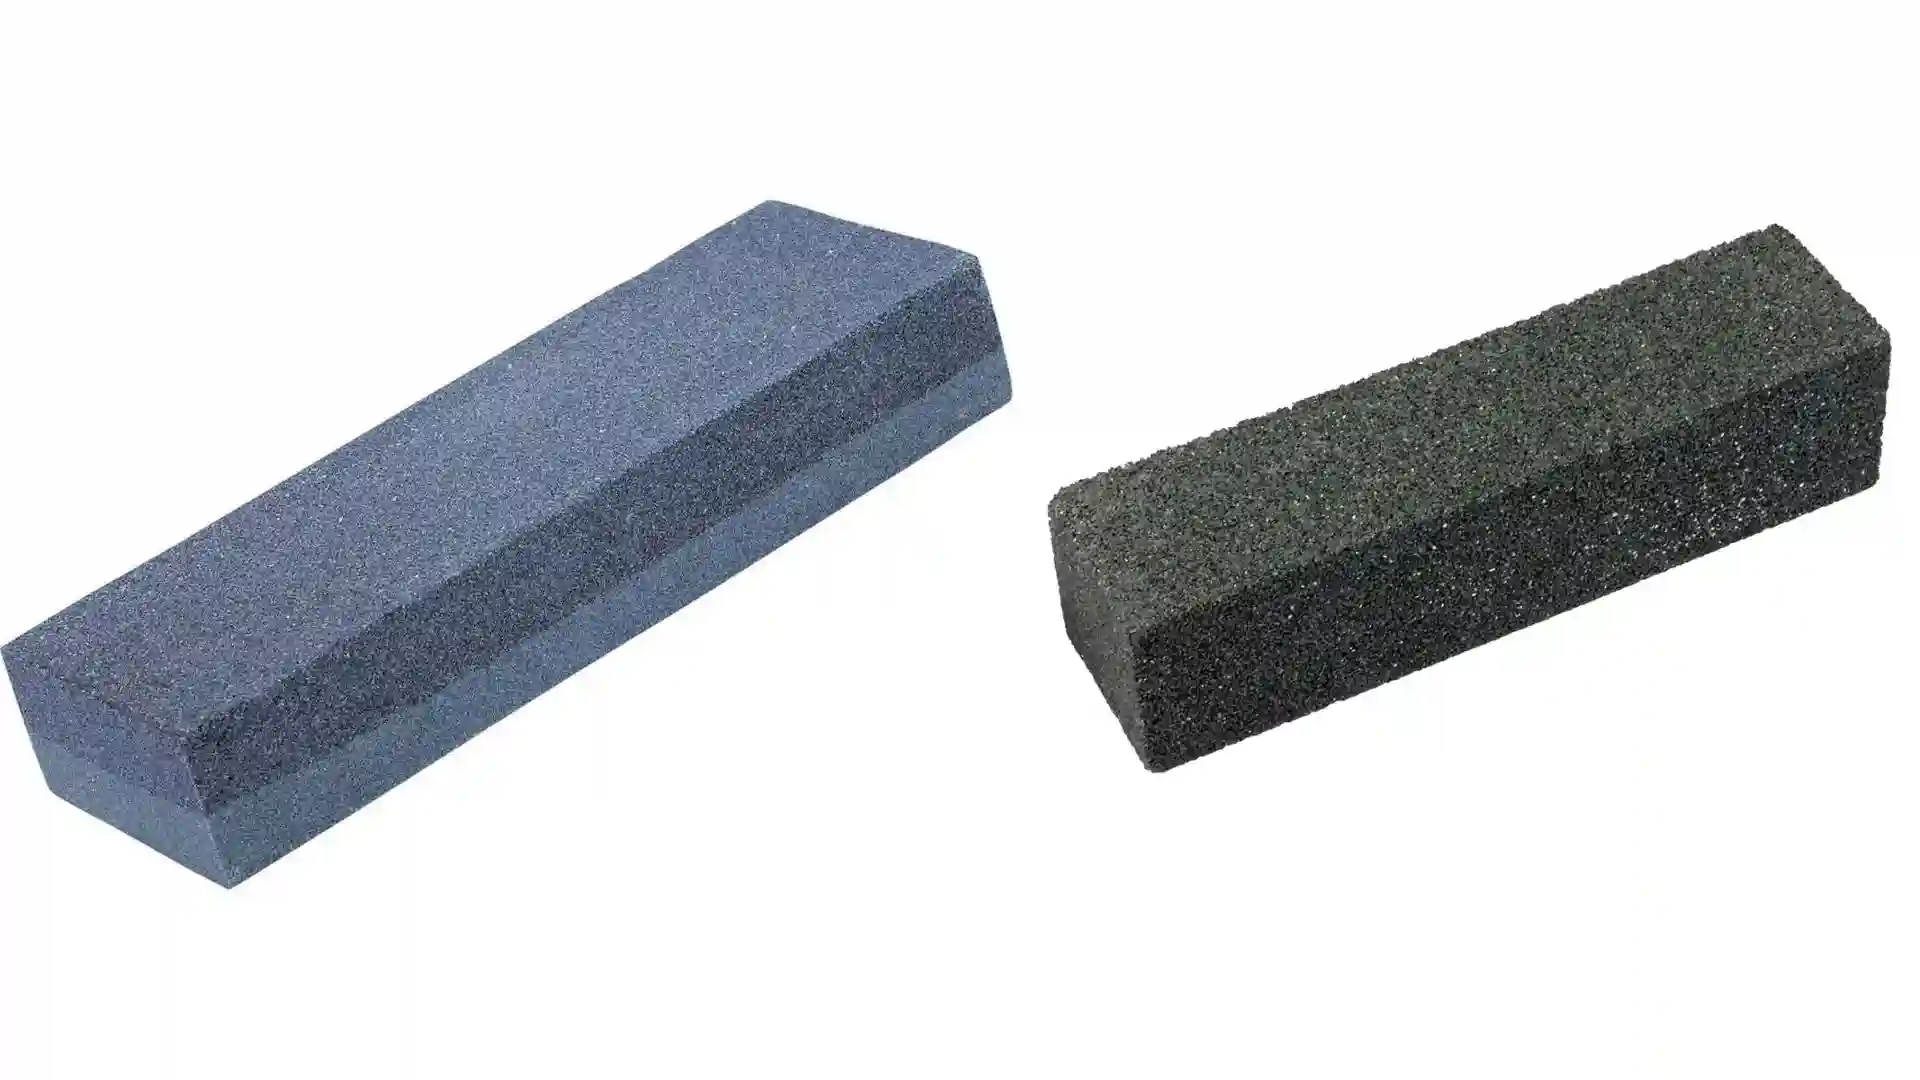 What is a carborundum stone ?